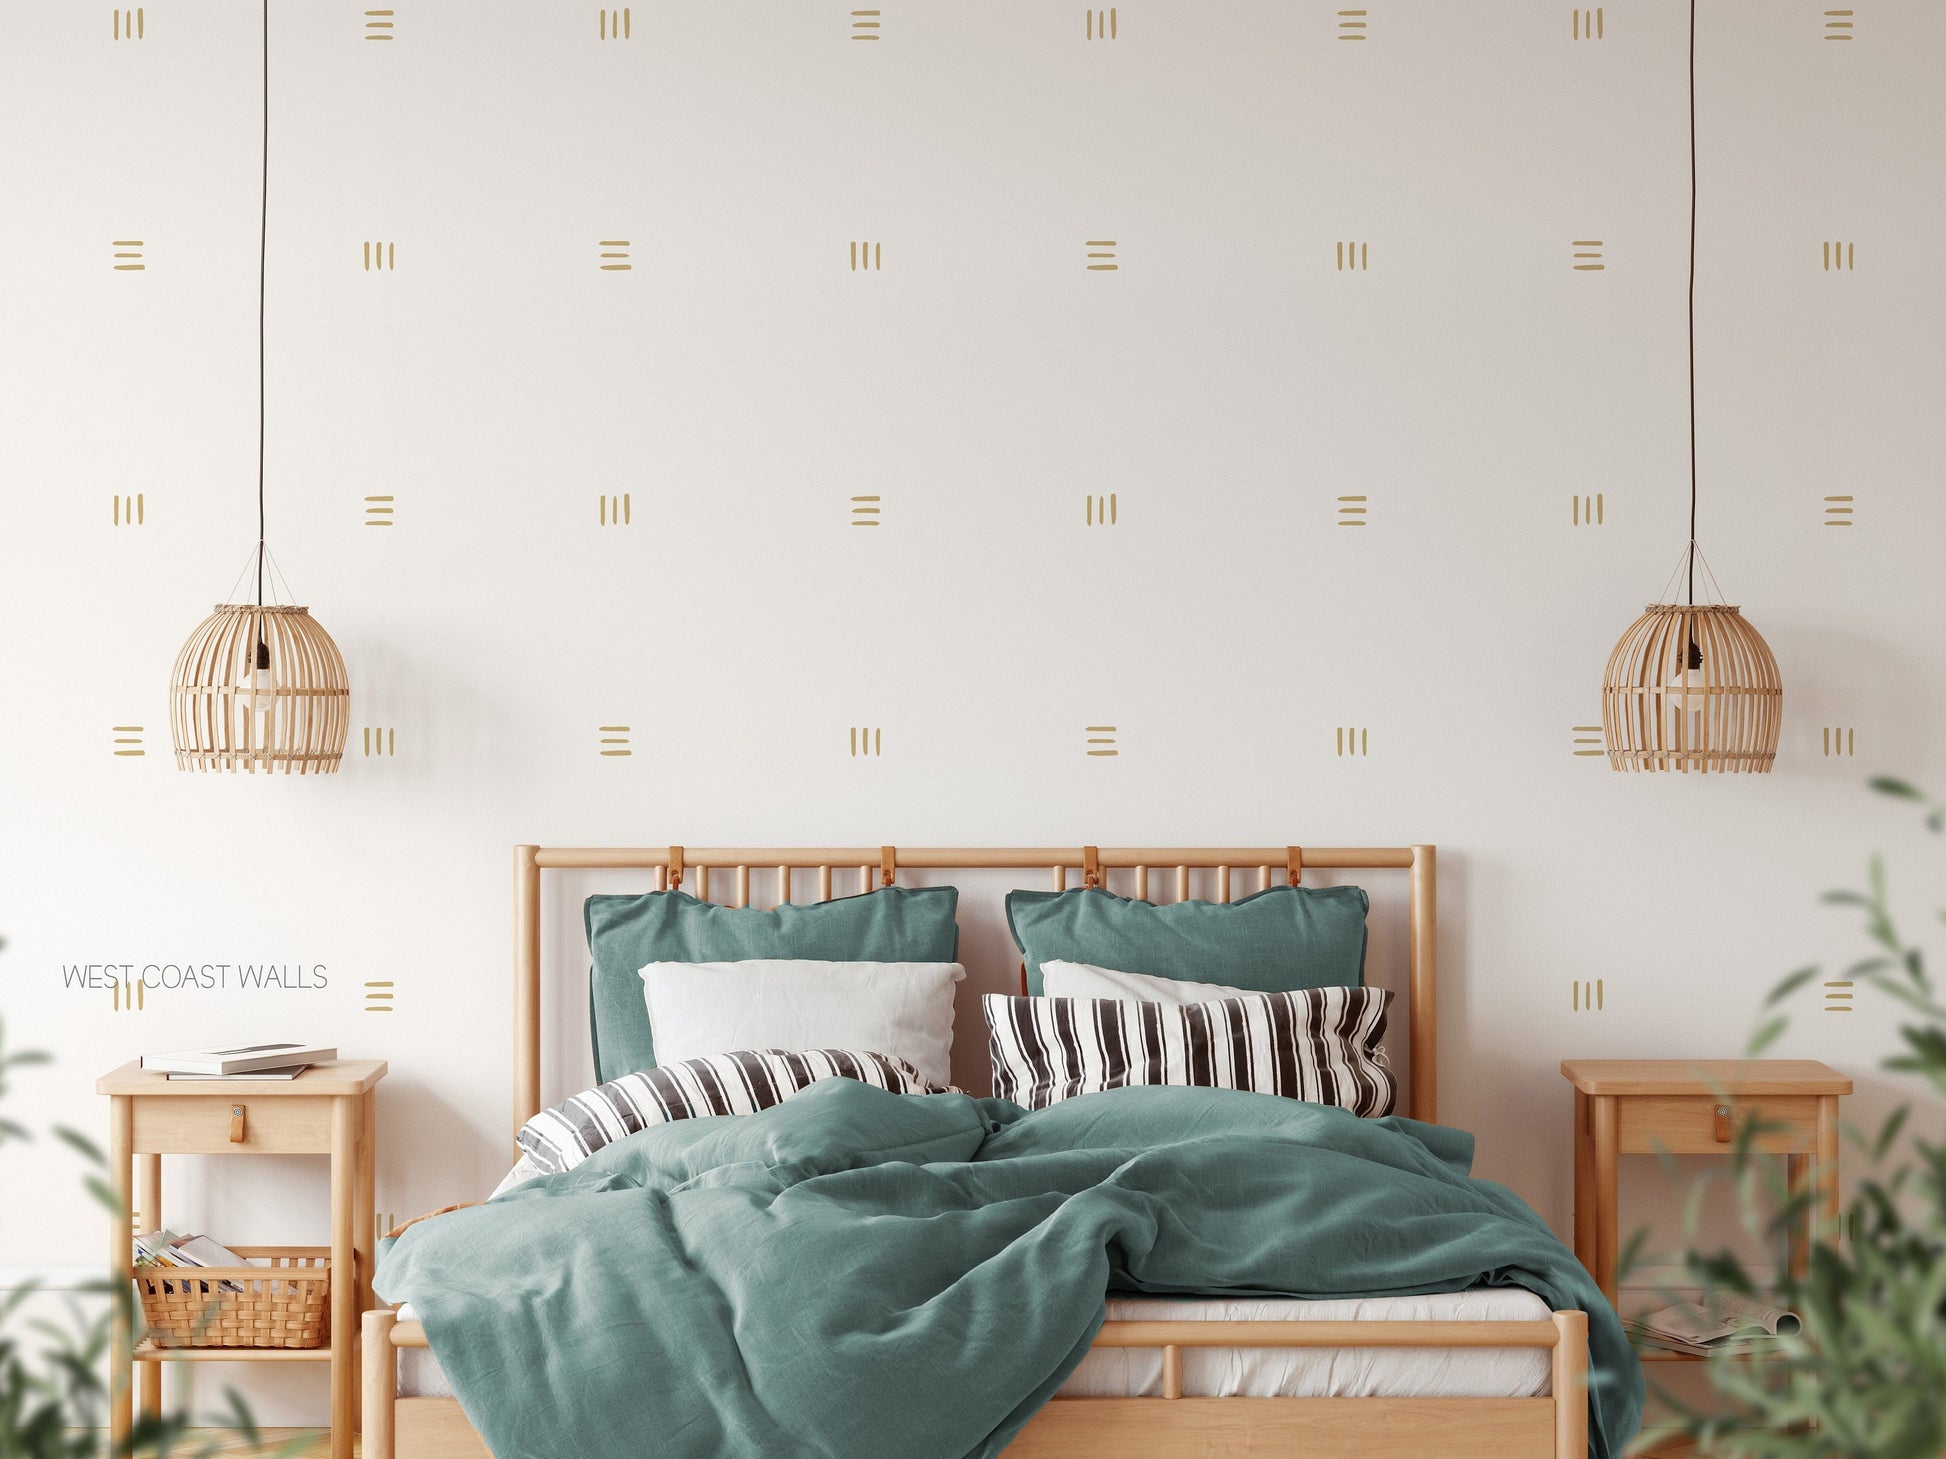 Line Group Removable Wall Decals